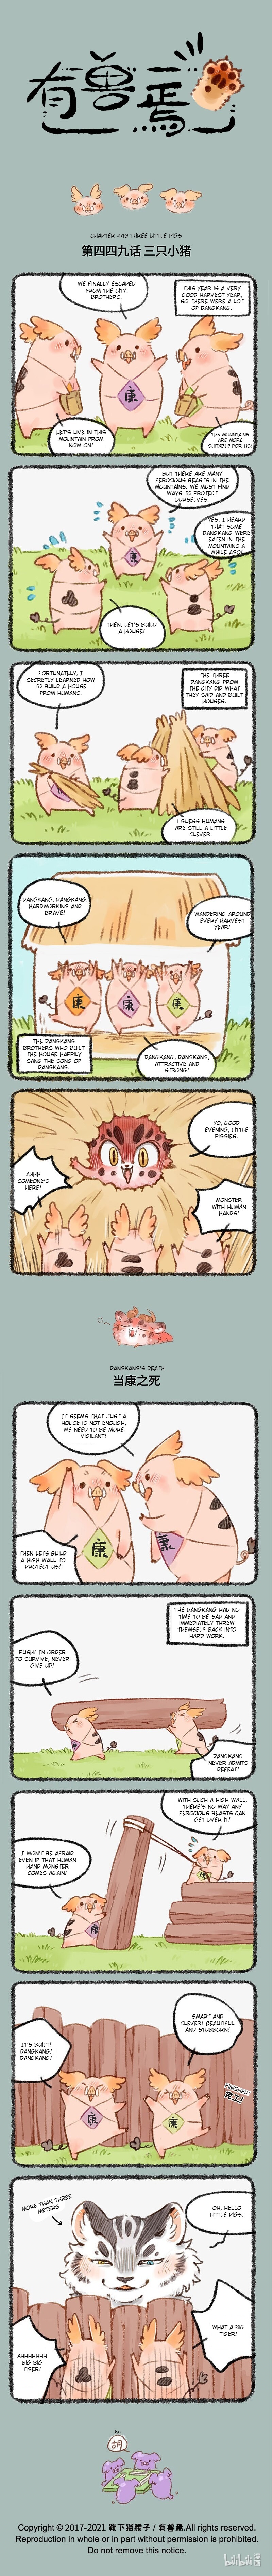 You Shou Yan Chapter 449: Three Little Pigs/dangkang's Death - Picture 1